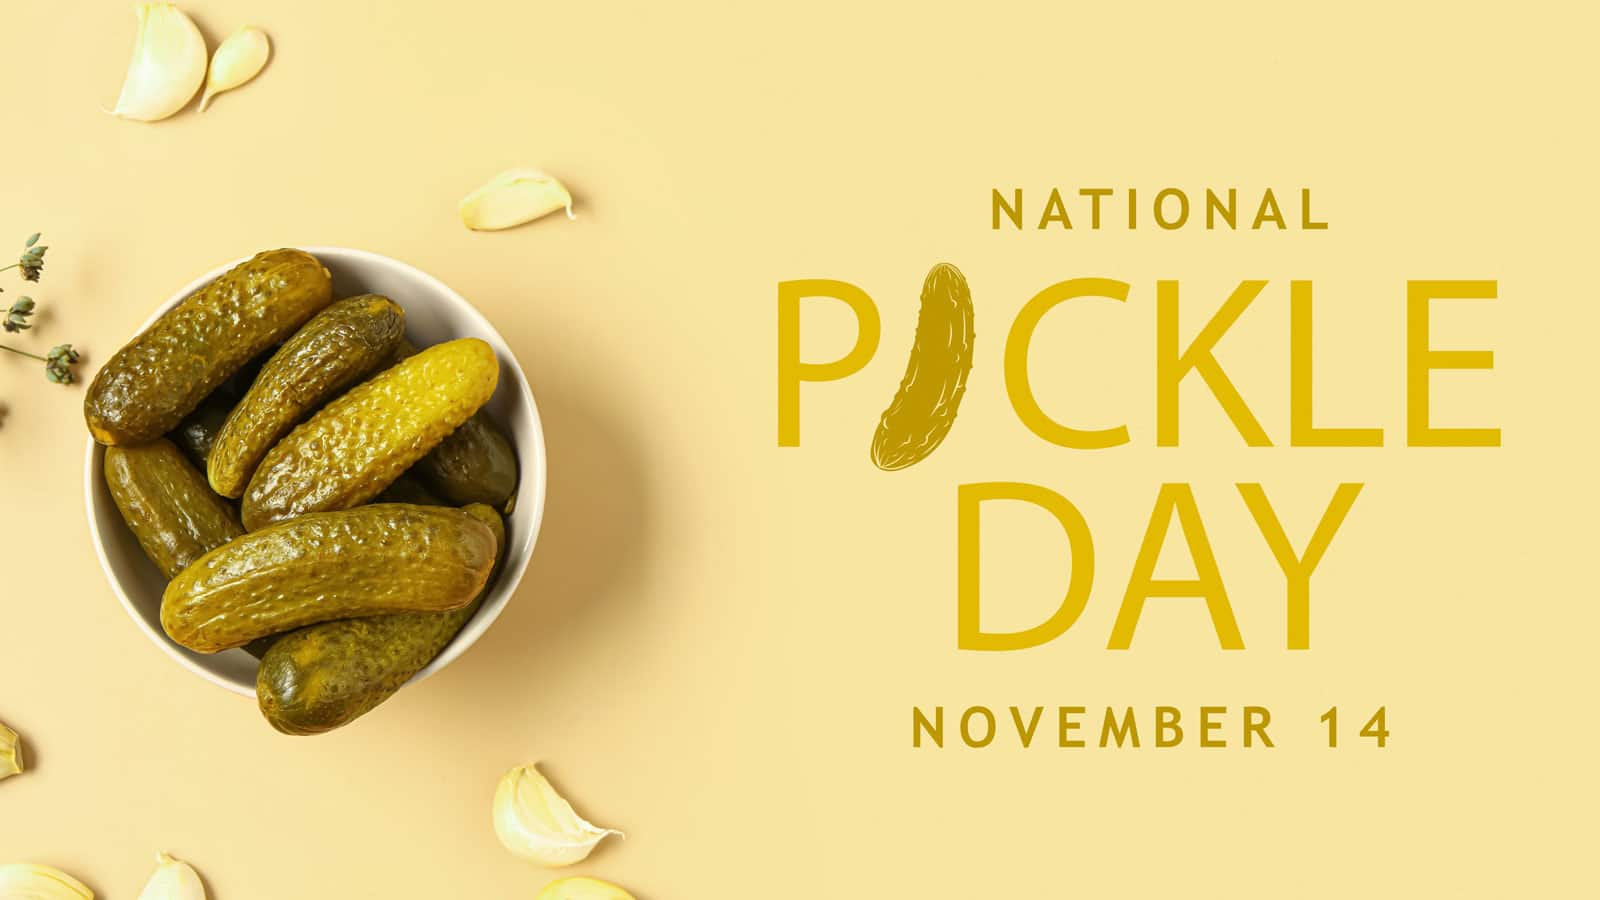 Pickling The Last Of The Fall Harvest For National Pickle Day On